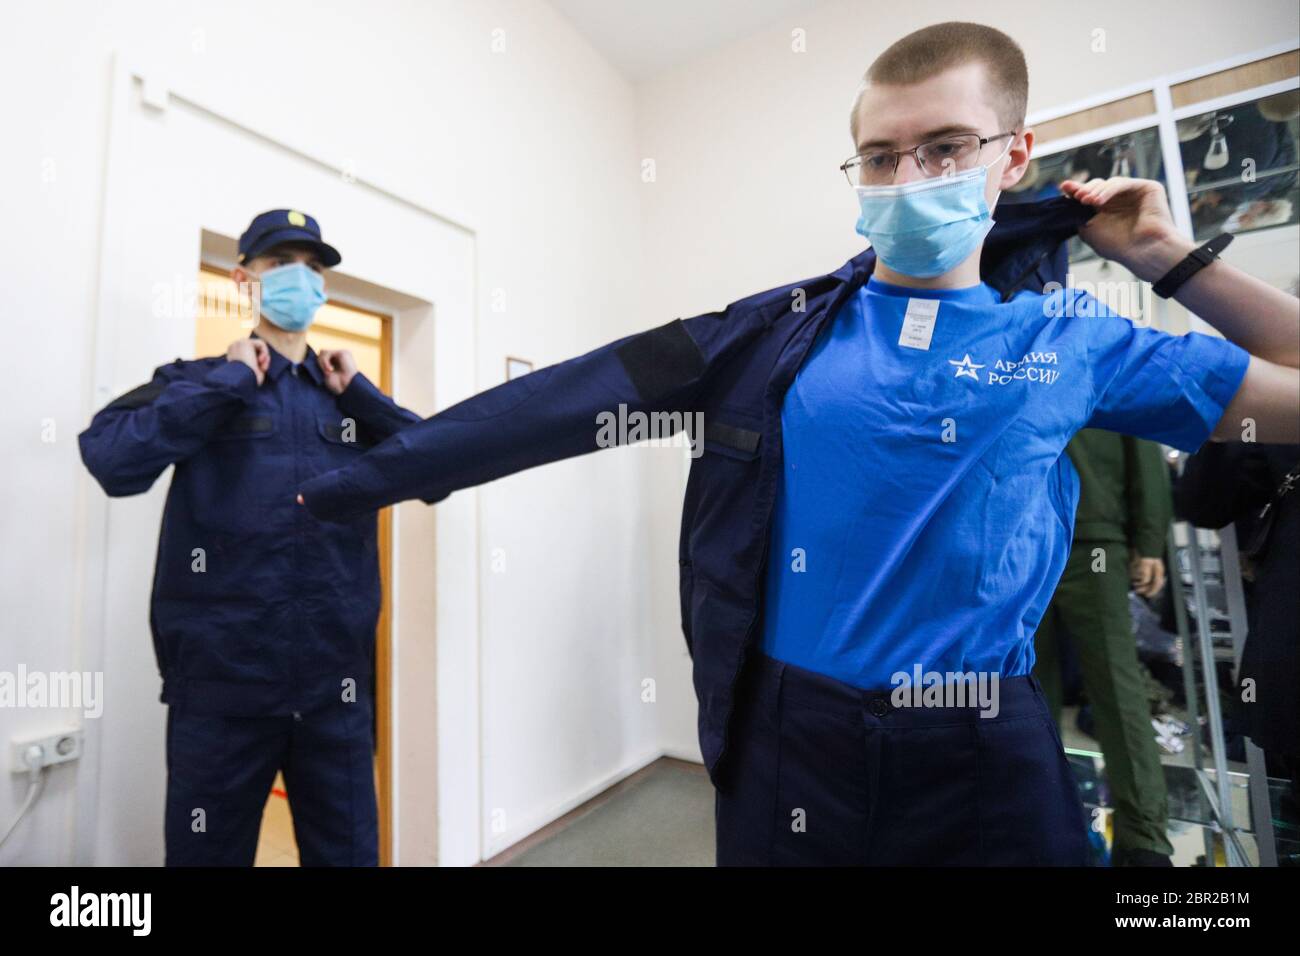 Russian recruits wearing face masks are seen changing into their military uniform at the recruitment center. President Vladimir Putin declared a send to the army of 135,000 people during the spring call-up in Russia which started on the 20th of May. All recruits tested for Covid-19 infection, will be quarantined for 14 days in their military units. Stock Photo